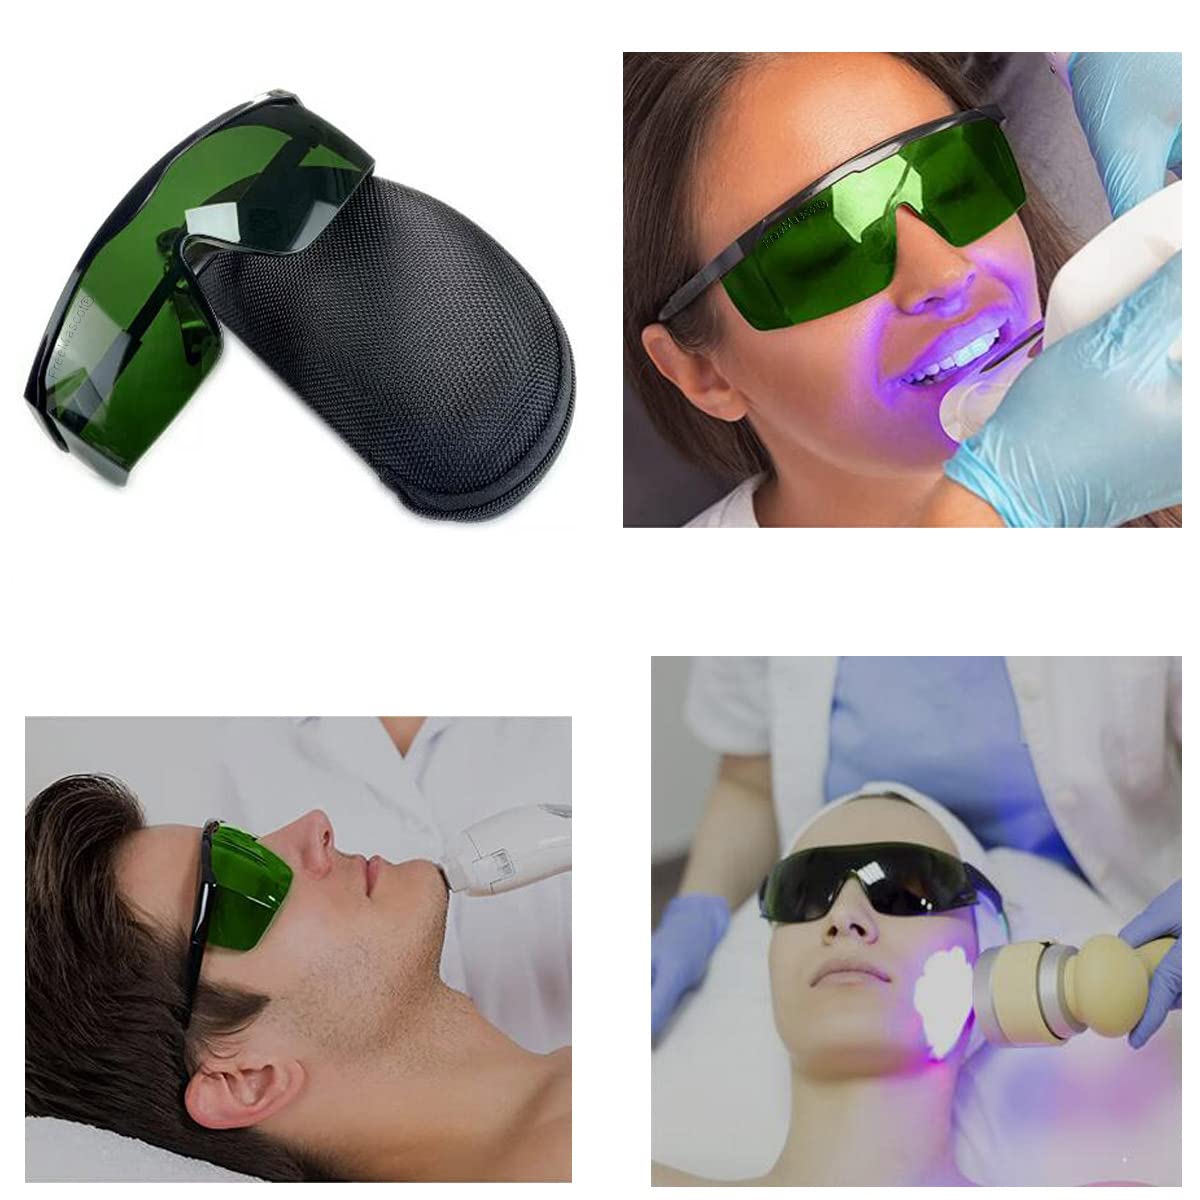 FreeMascot IPL 200nm-2000nm Laser Safety Glasses for Laser Hair Removal Treatment and Laser Cosmetology Operator Eye Protection with Case (Green)